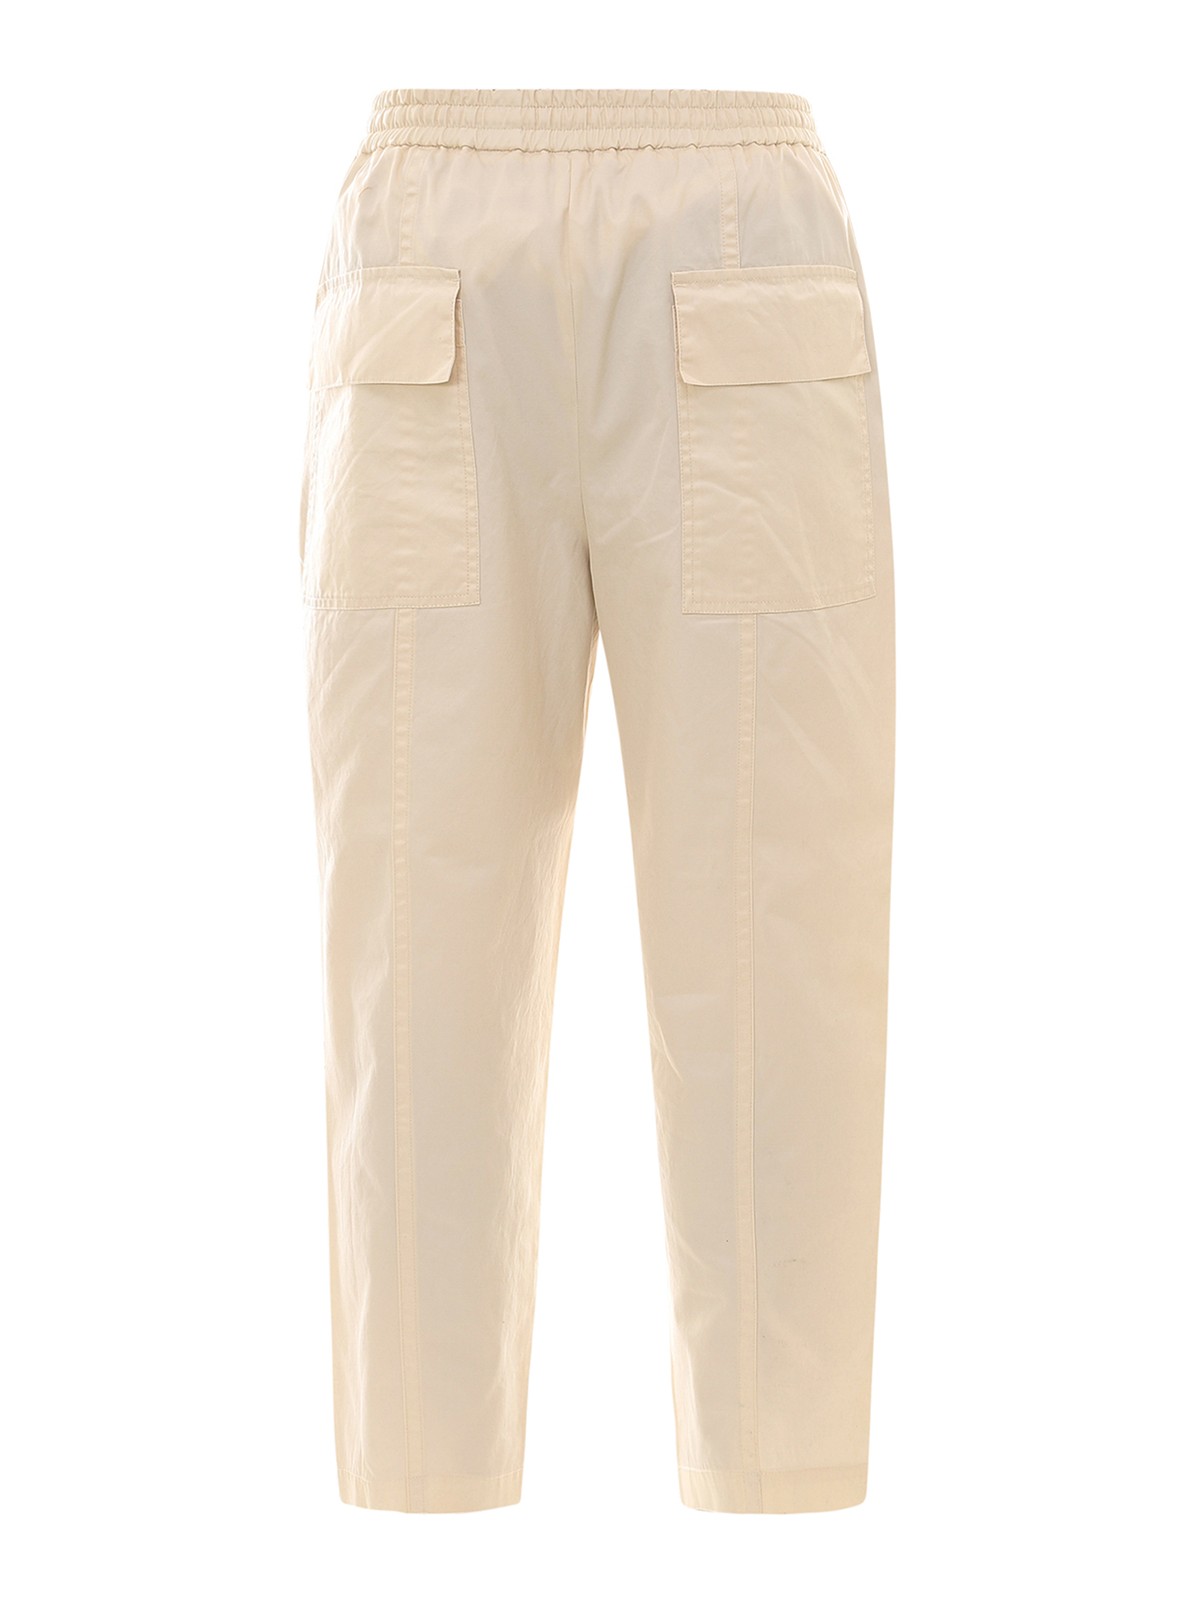 Buy OffWhite Cotton Trouser Online at Jayporecom